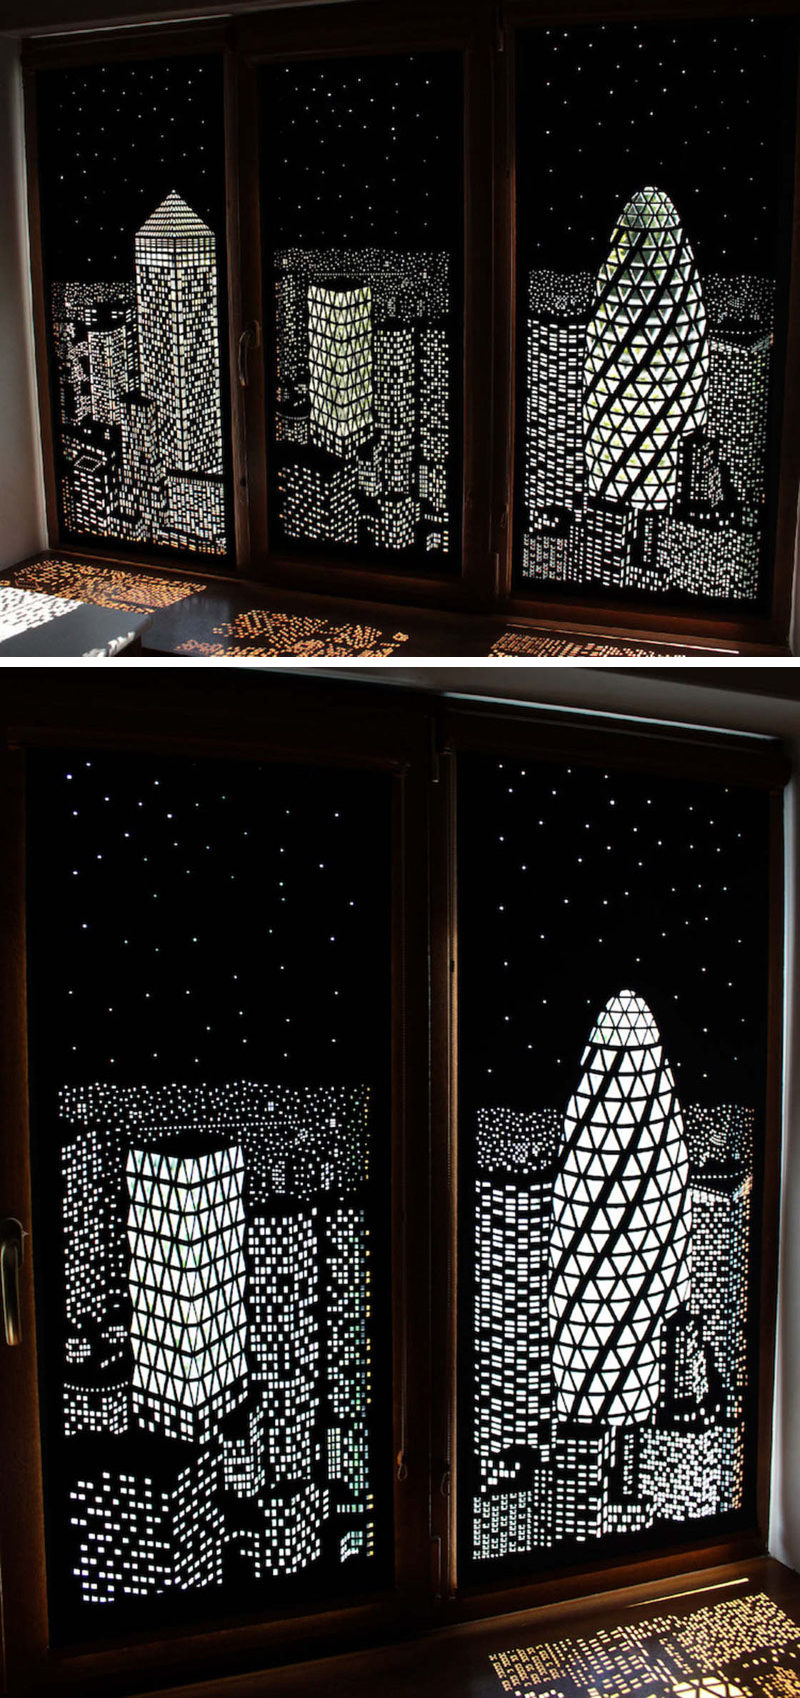 Ukrainian design company, HoleRoll have developed a collection of roller blinds that black out daylight and provide an artistic city skyline view.